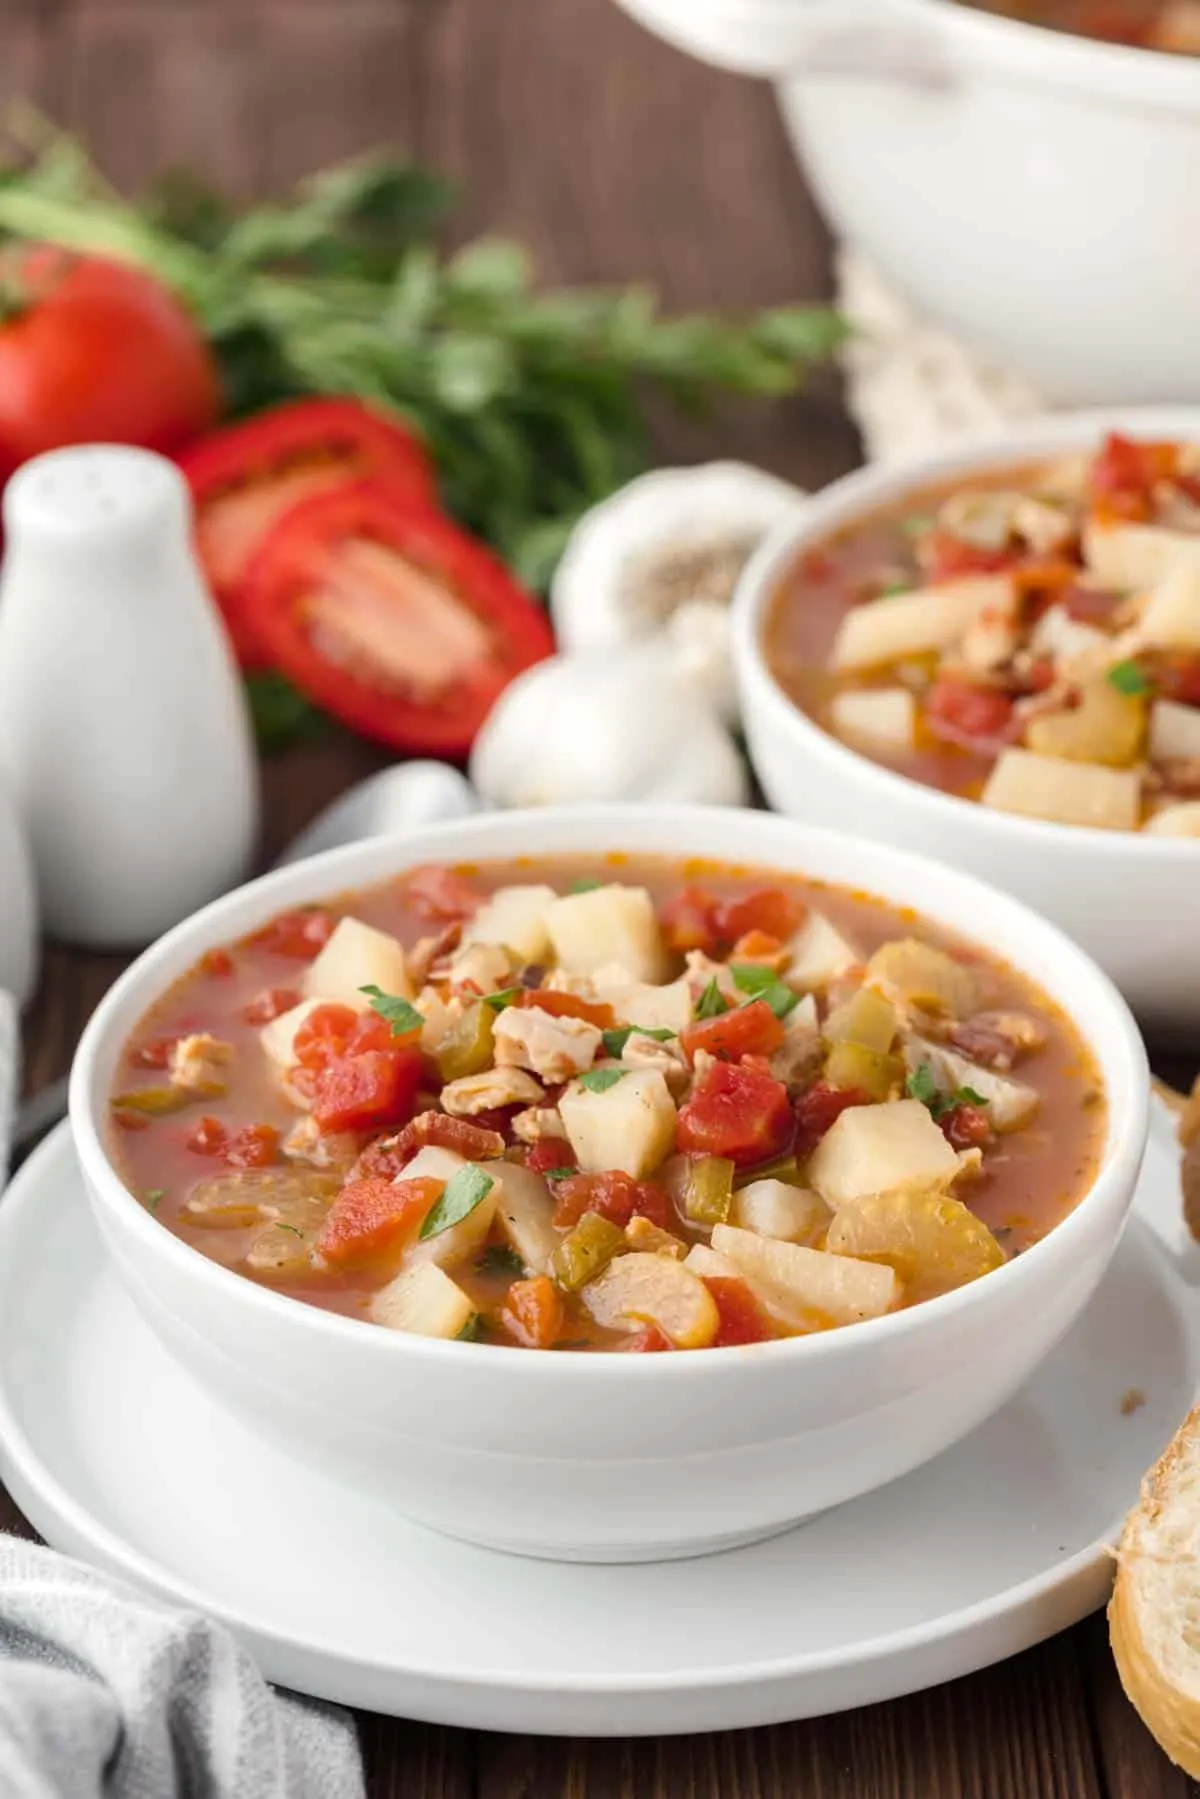 Manhattan Clam Chowder - THIS IS NOT DIET FOOD